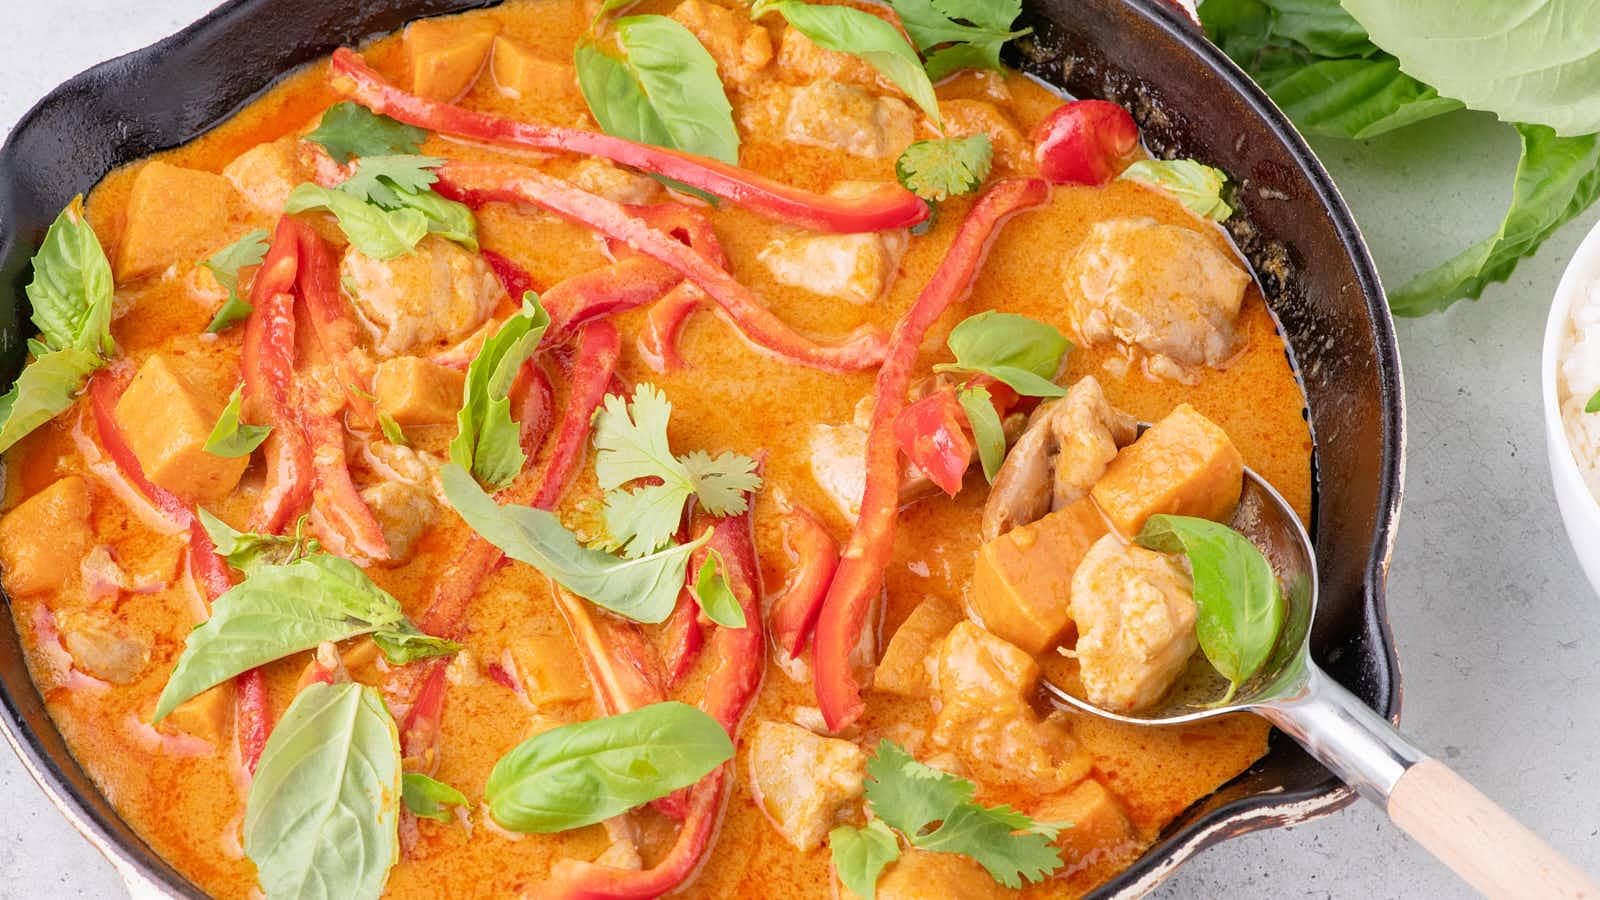 Red Thai Chicken Curry recipe by Cheerful Cook.